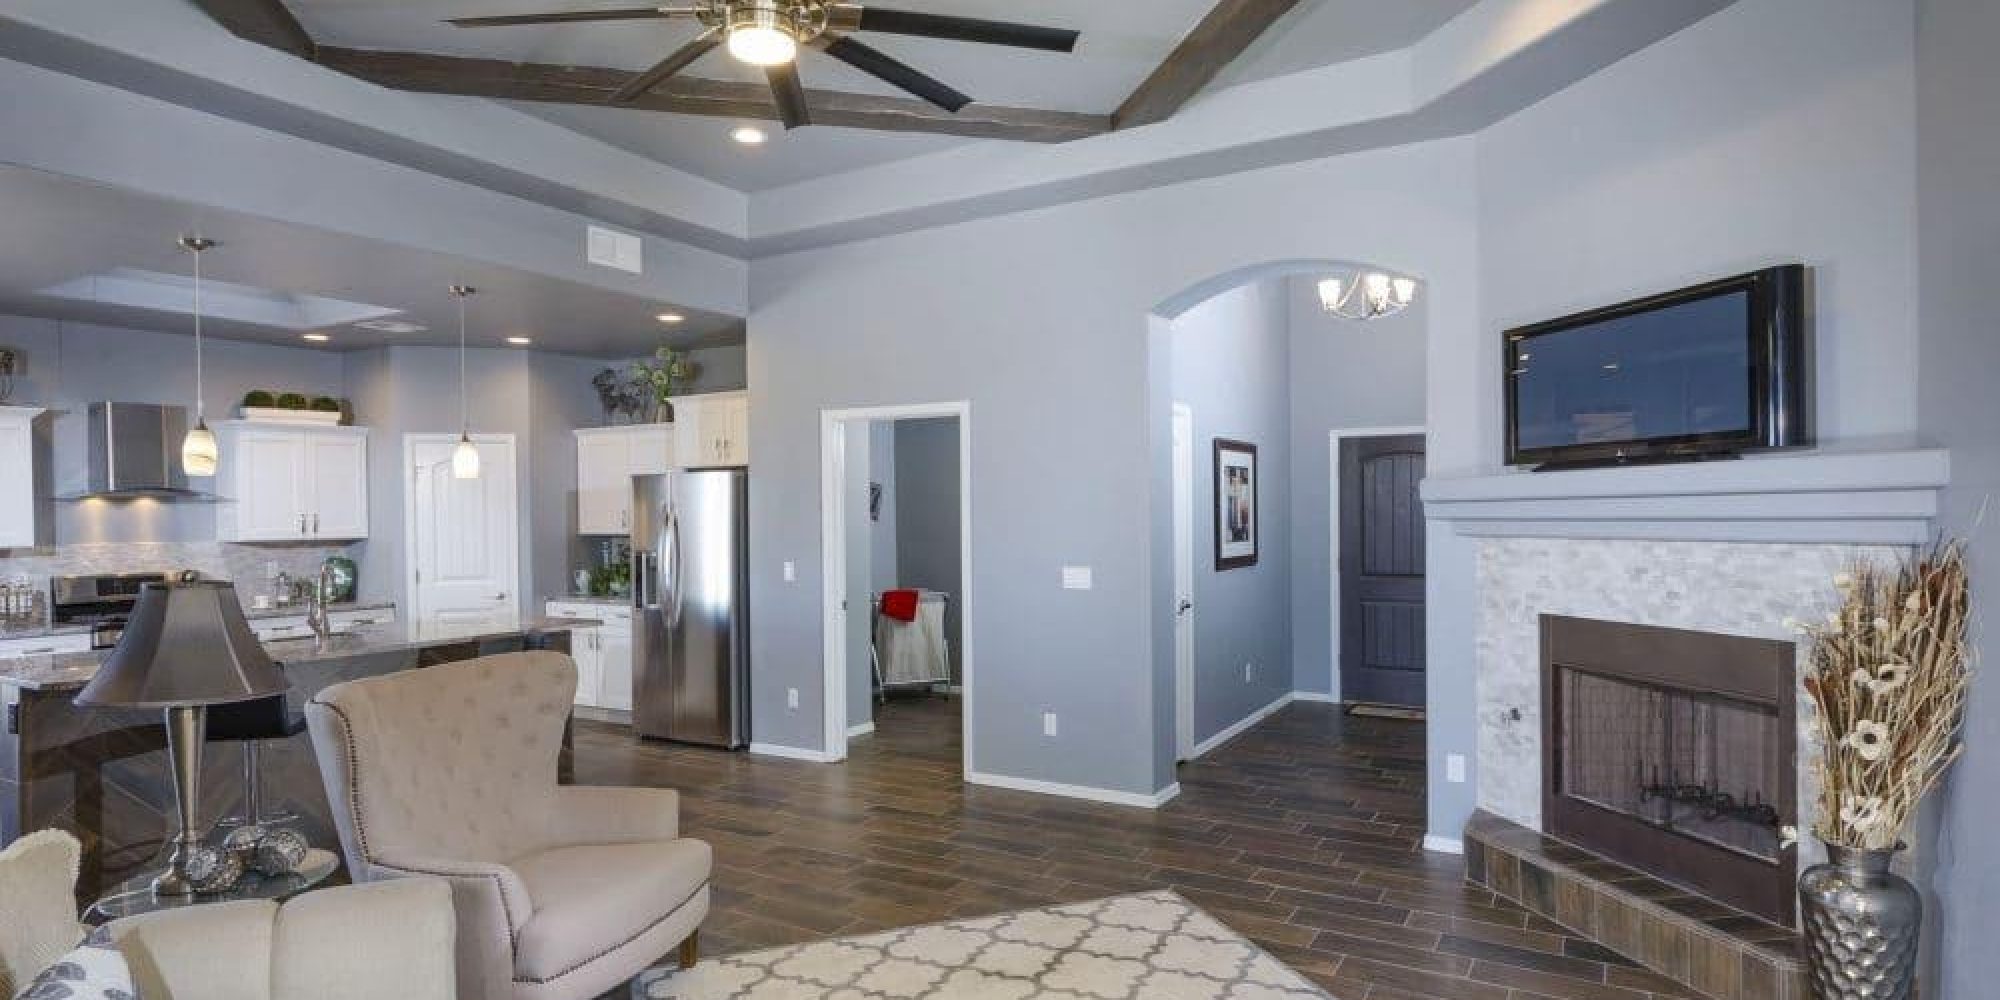 A beautifully redesigned living room Las Cruces